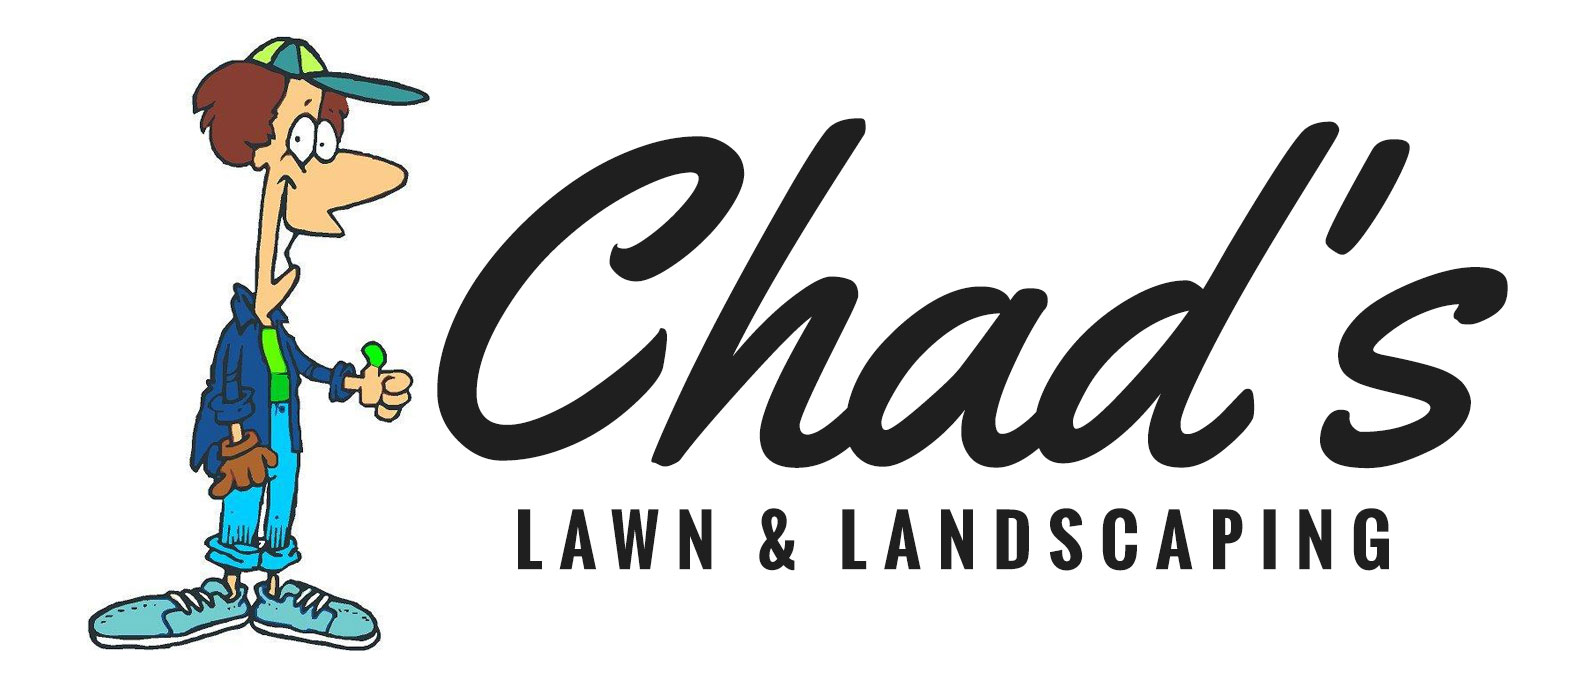 Chad's Lawn & Landscaping